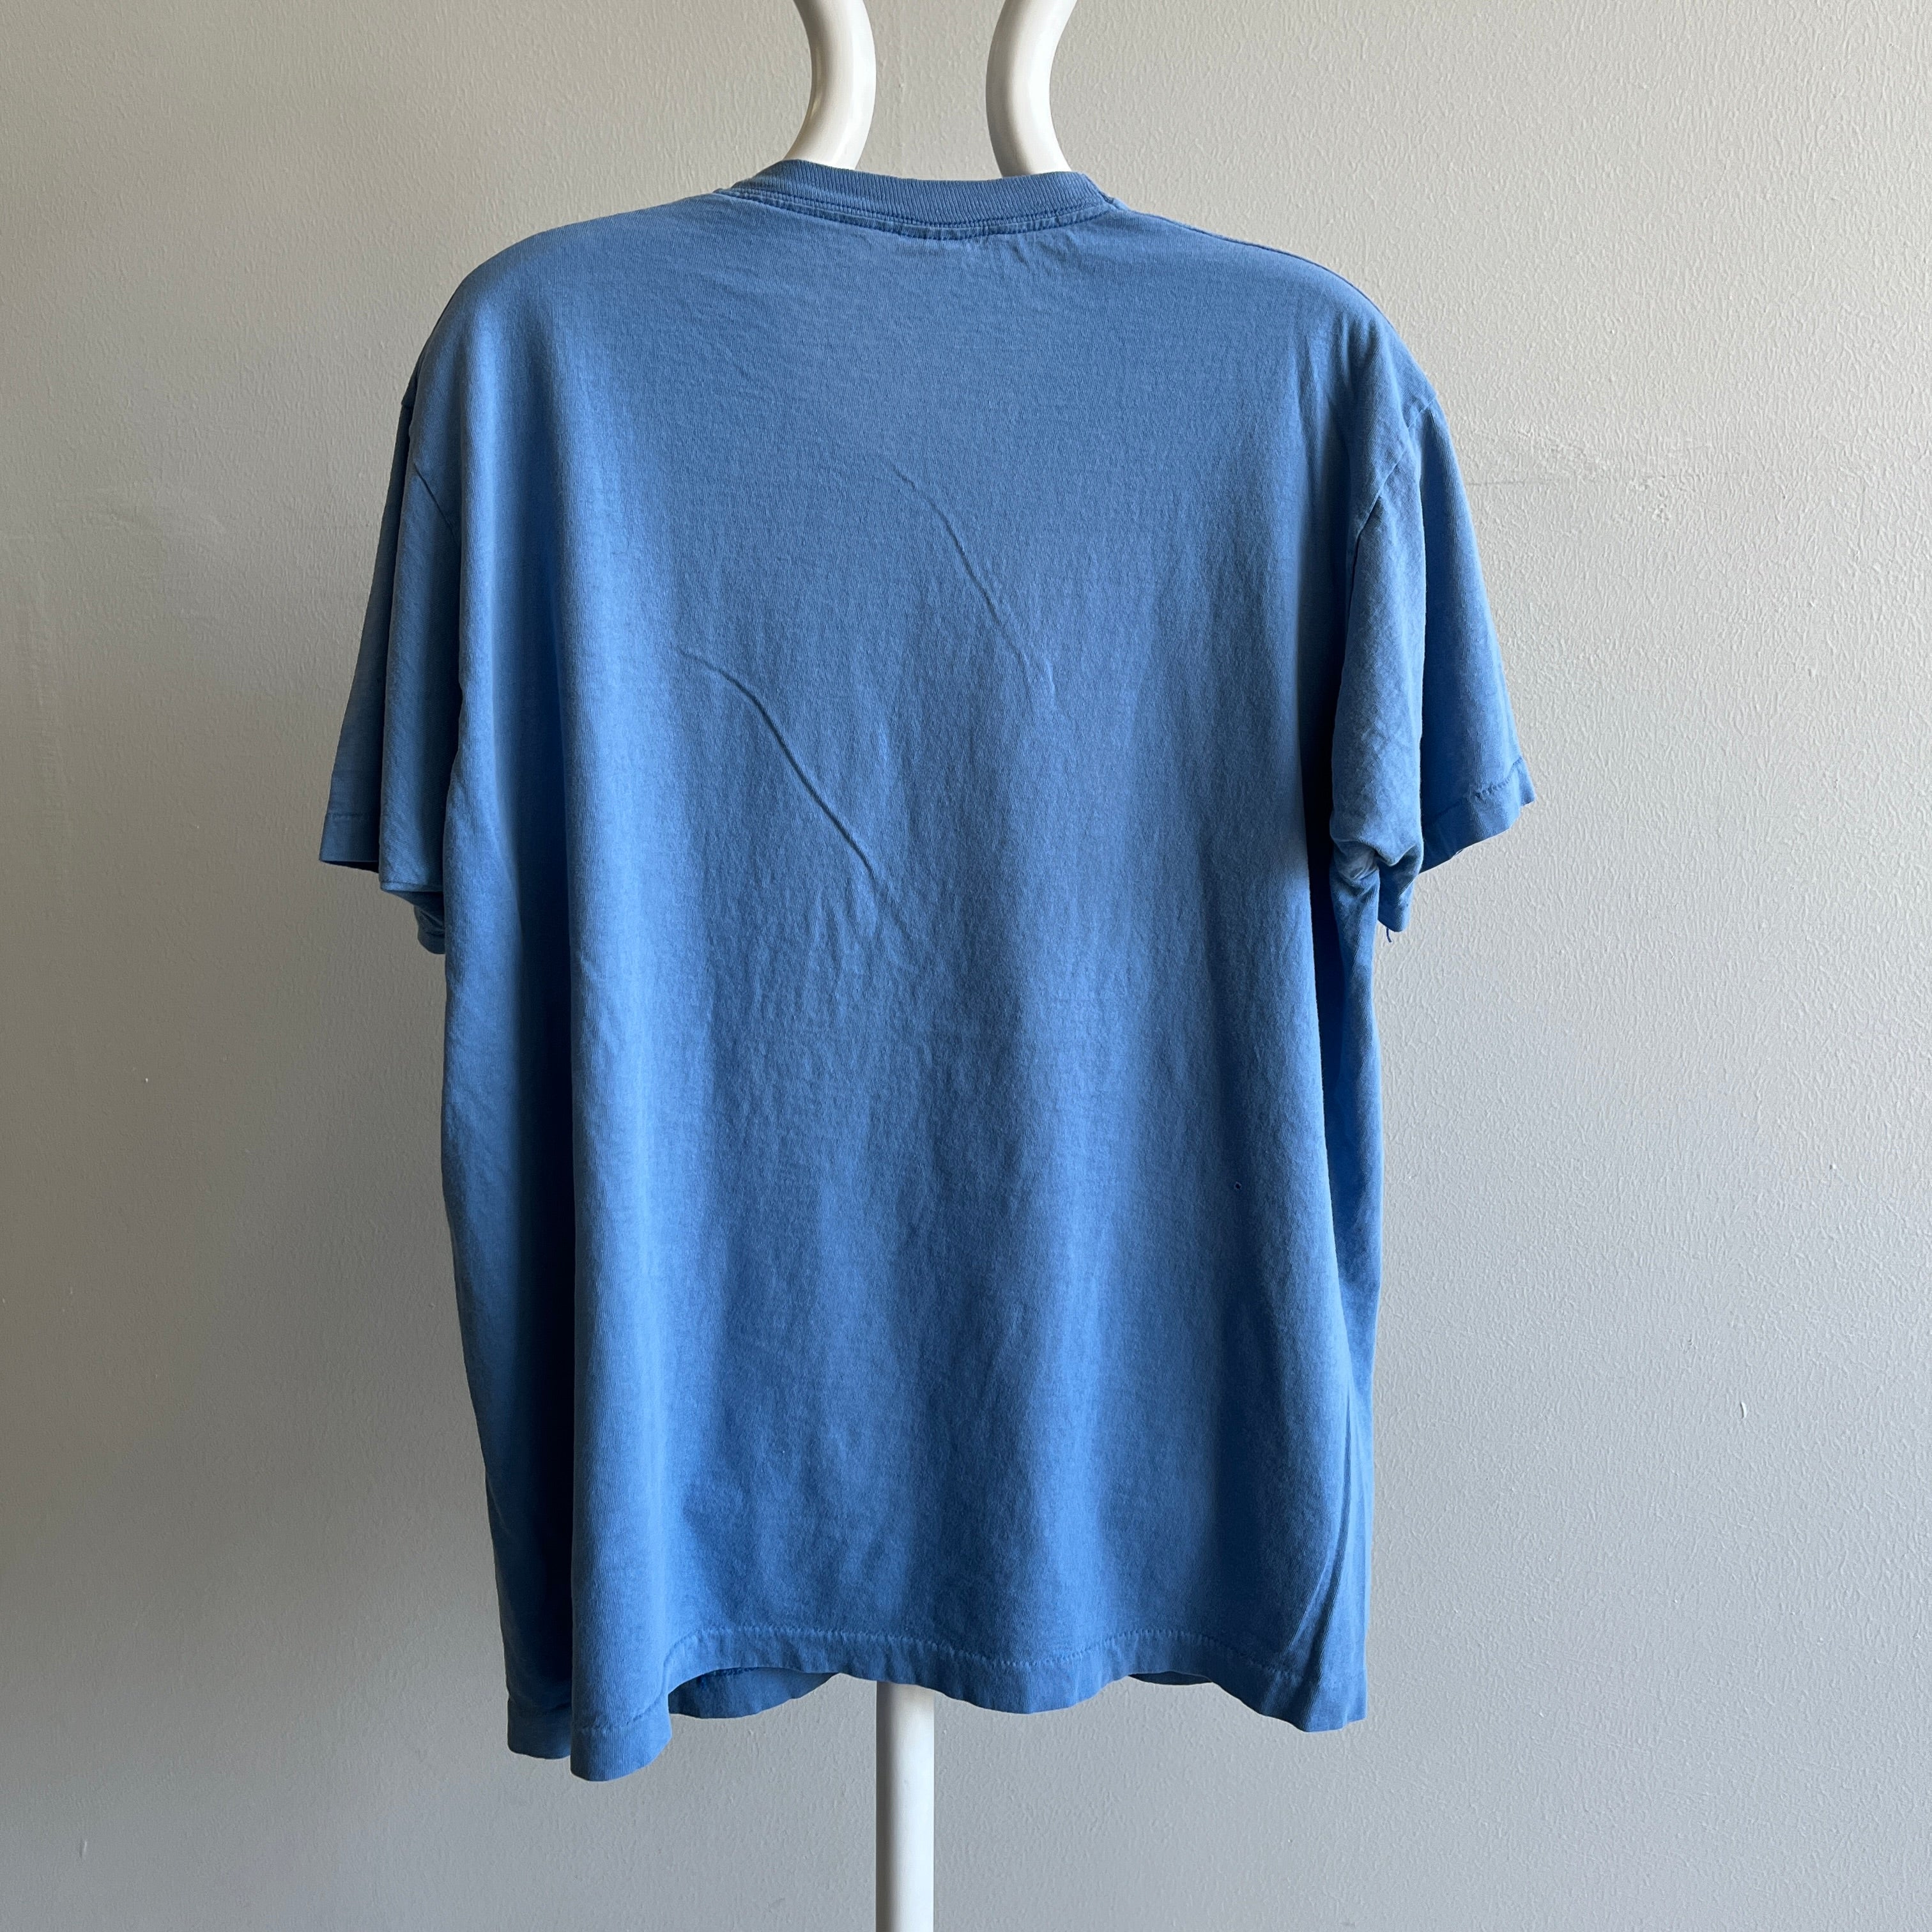 1980s THE PERFECT VINTAGE T-SHIRT by FOTL